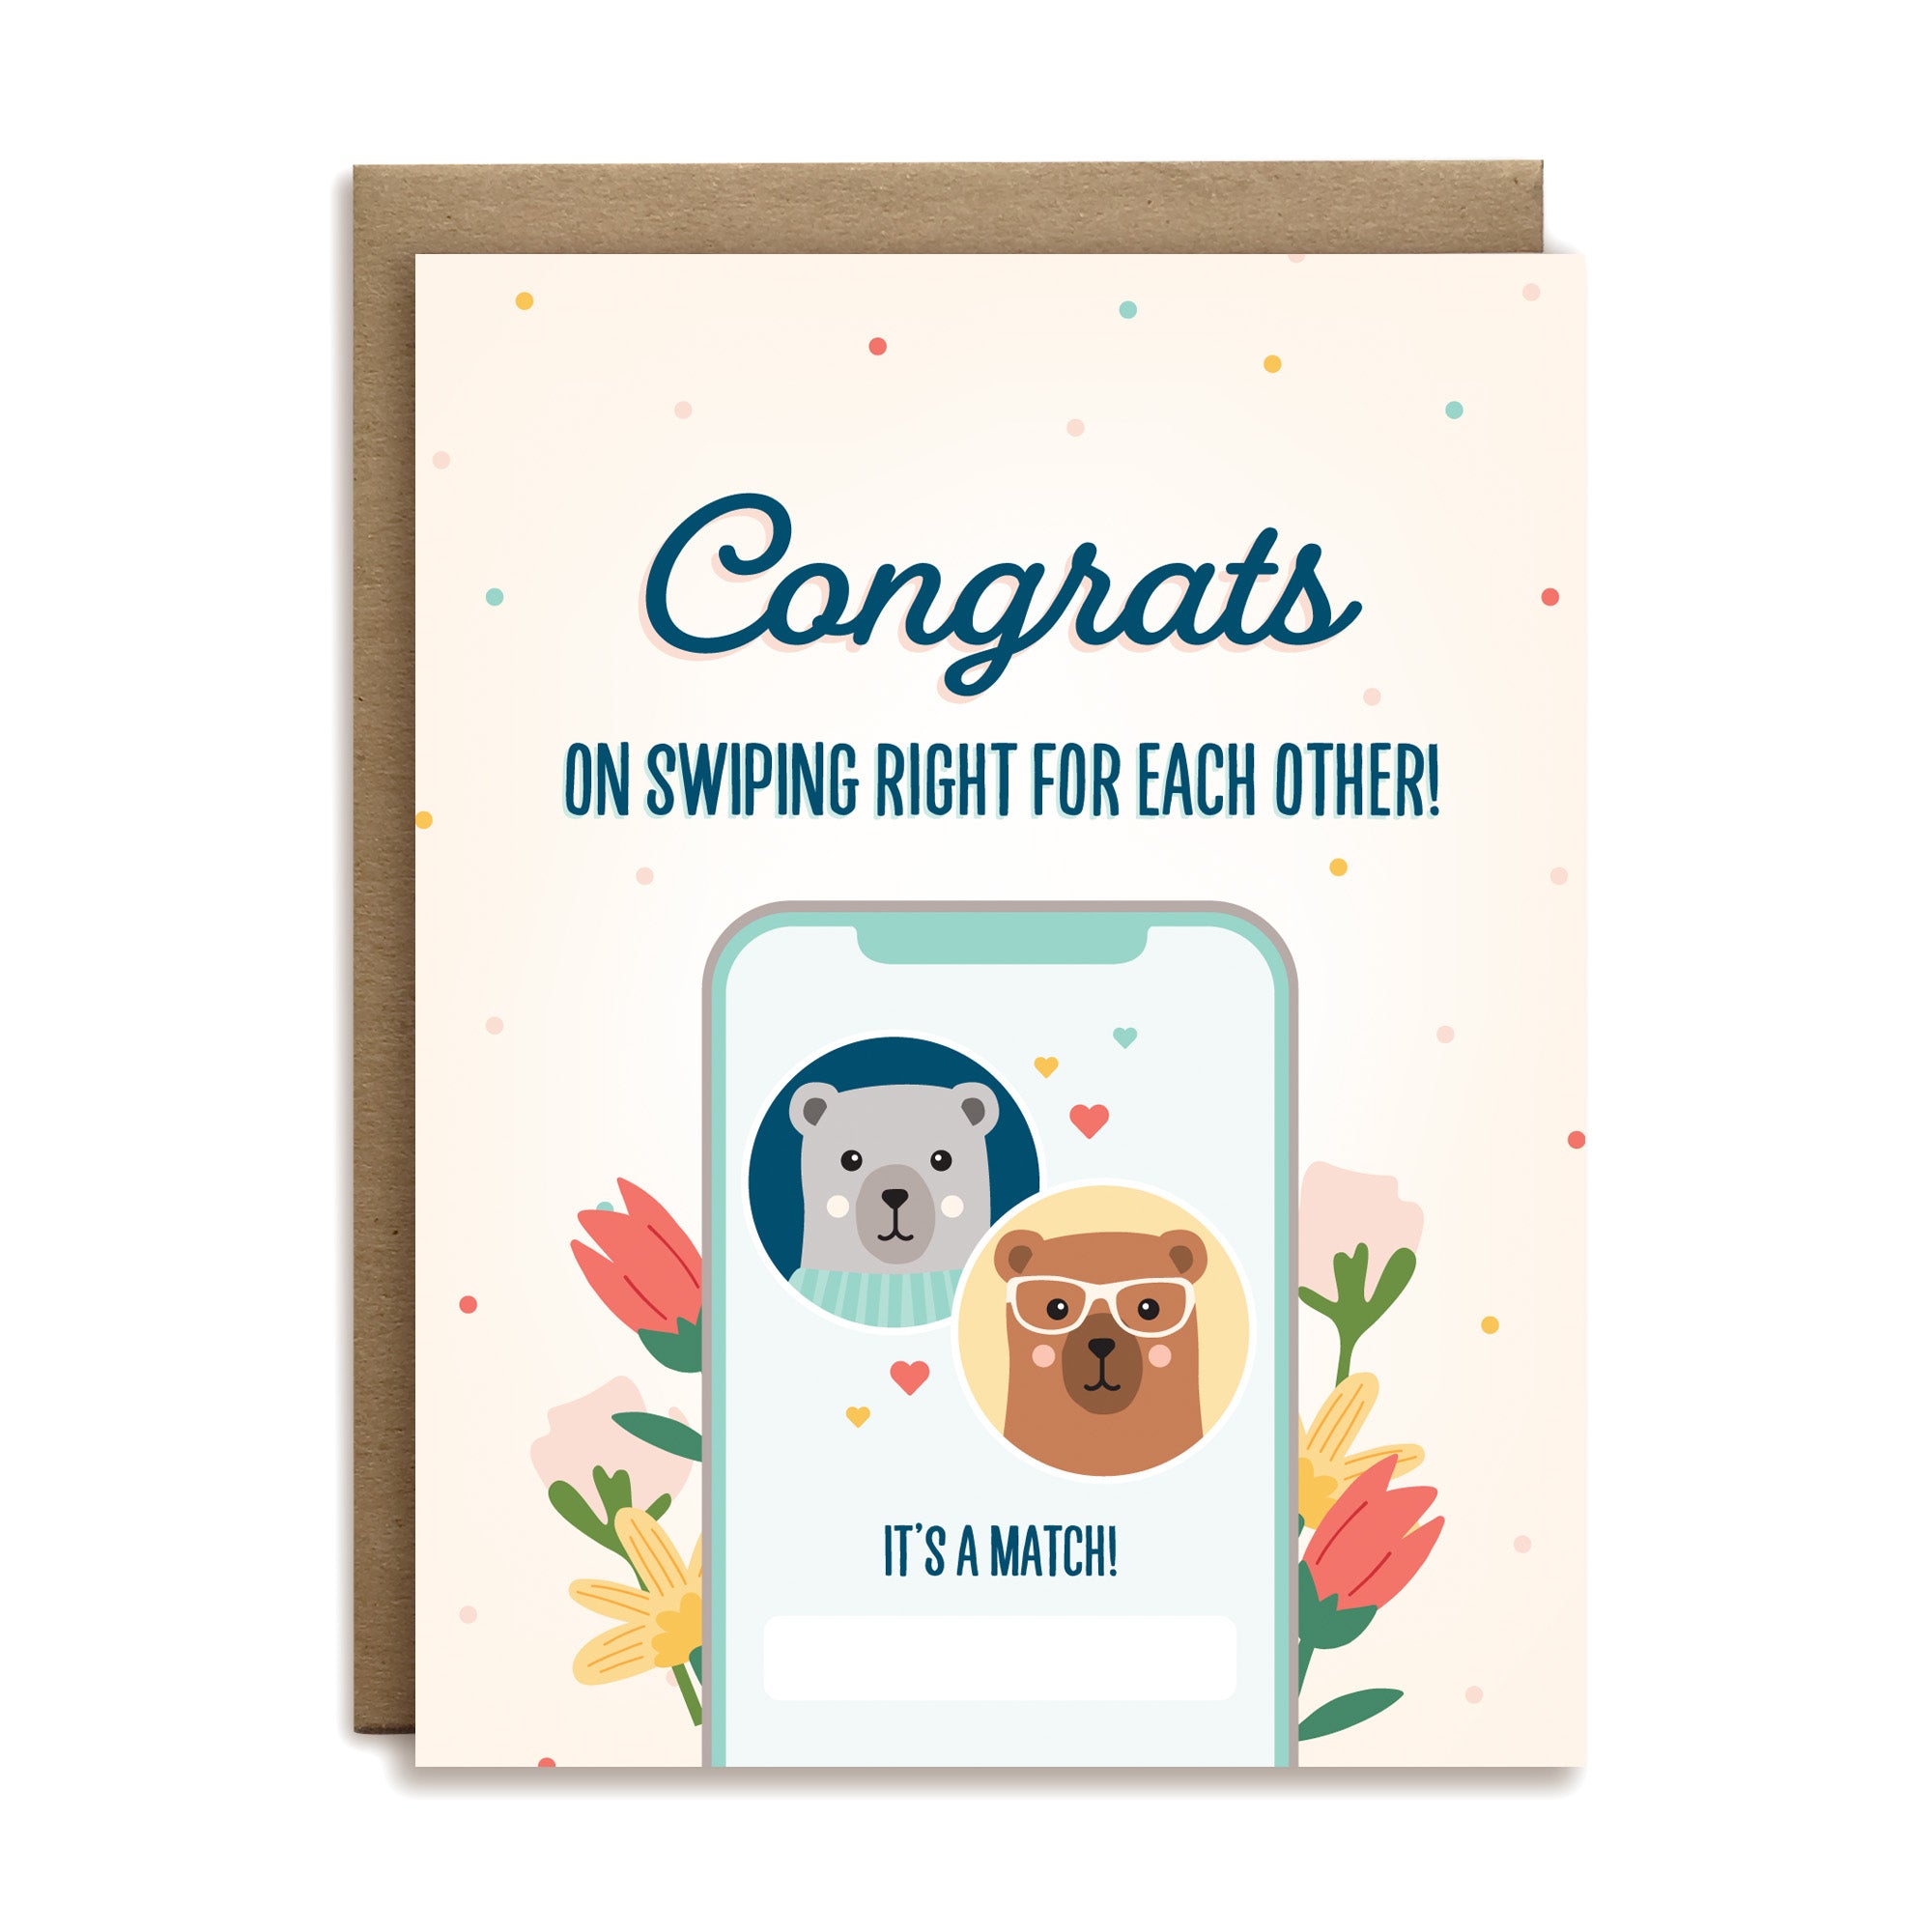 Congrats on swiping right for each other tinder online dating wedding greeting card by I&